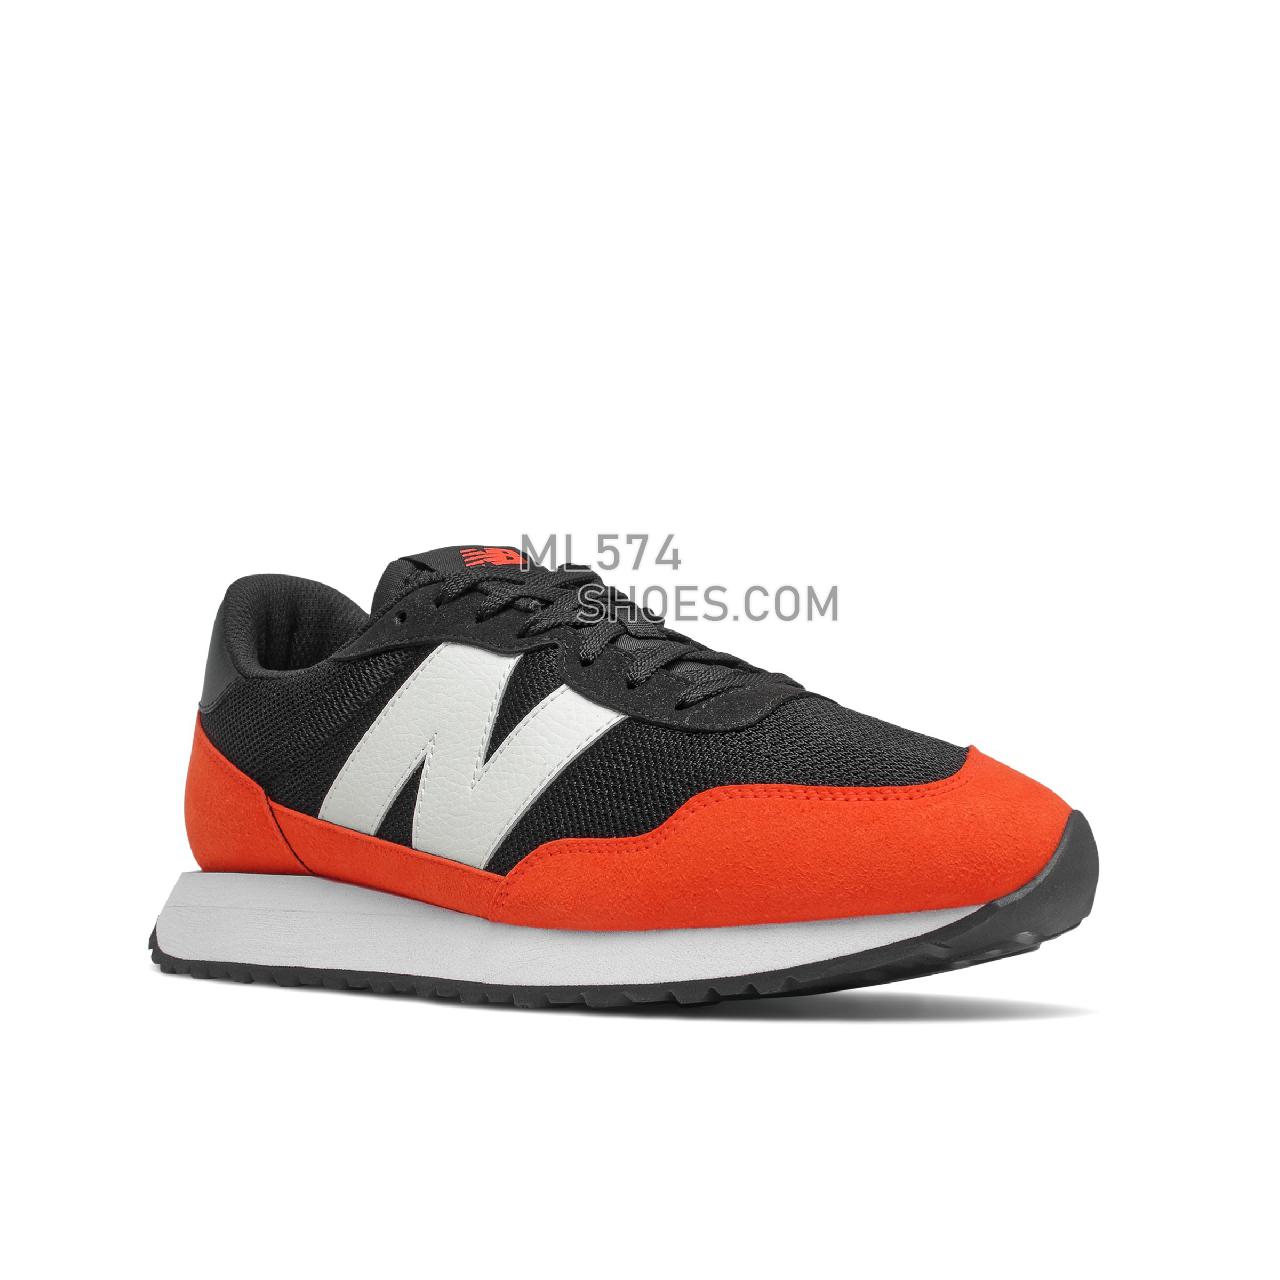 New Balance 237 - Men's Sport Style Sneakers - Black with Neo Flame - MS237PR1